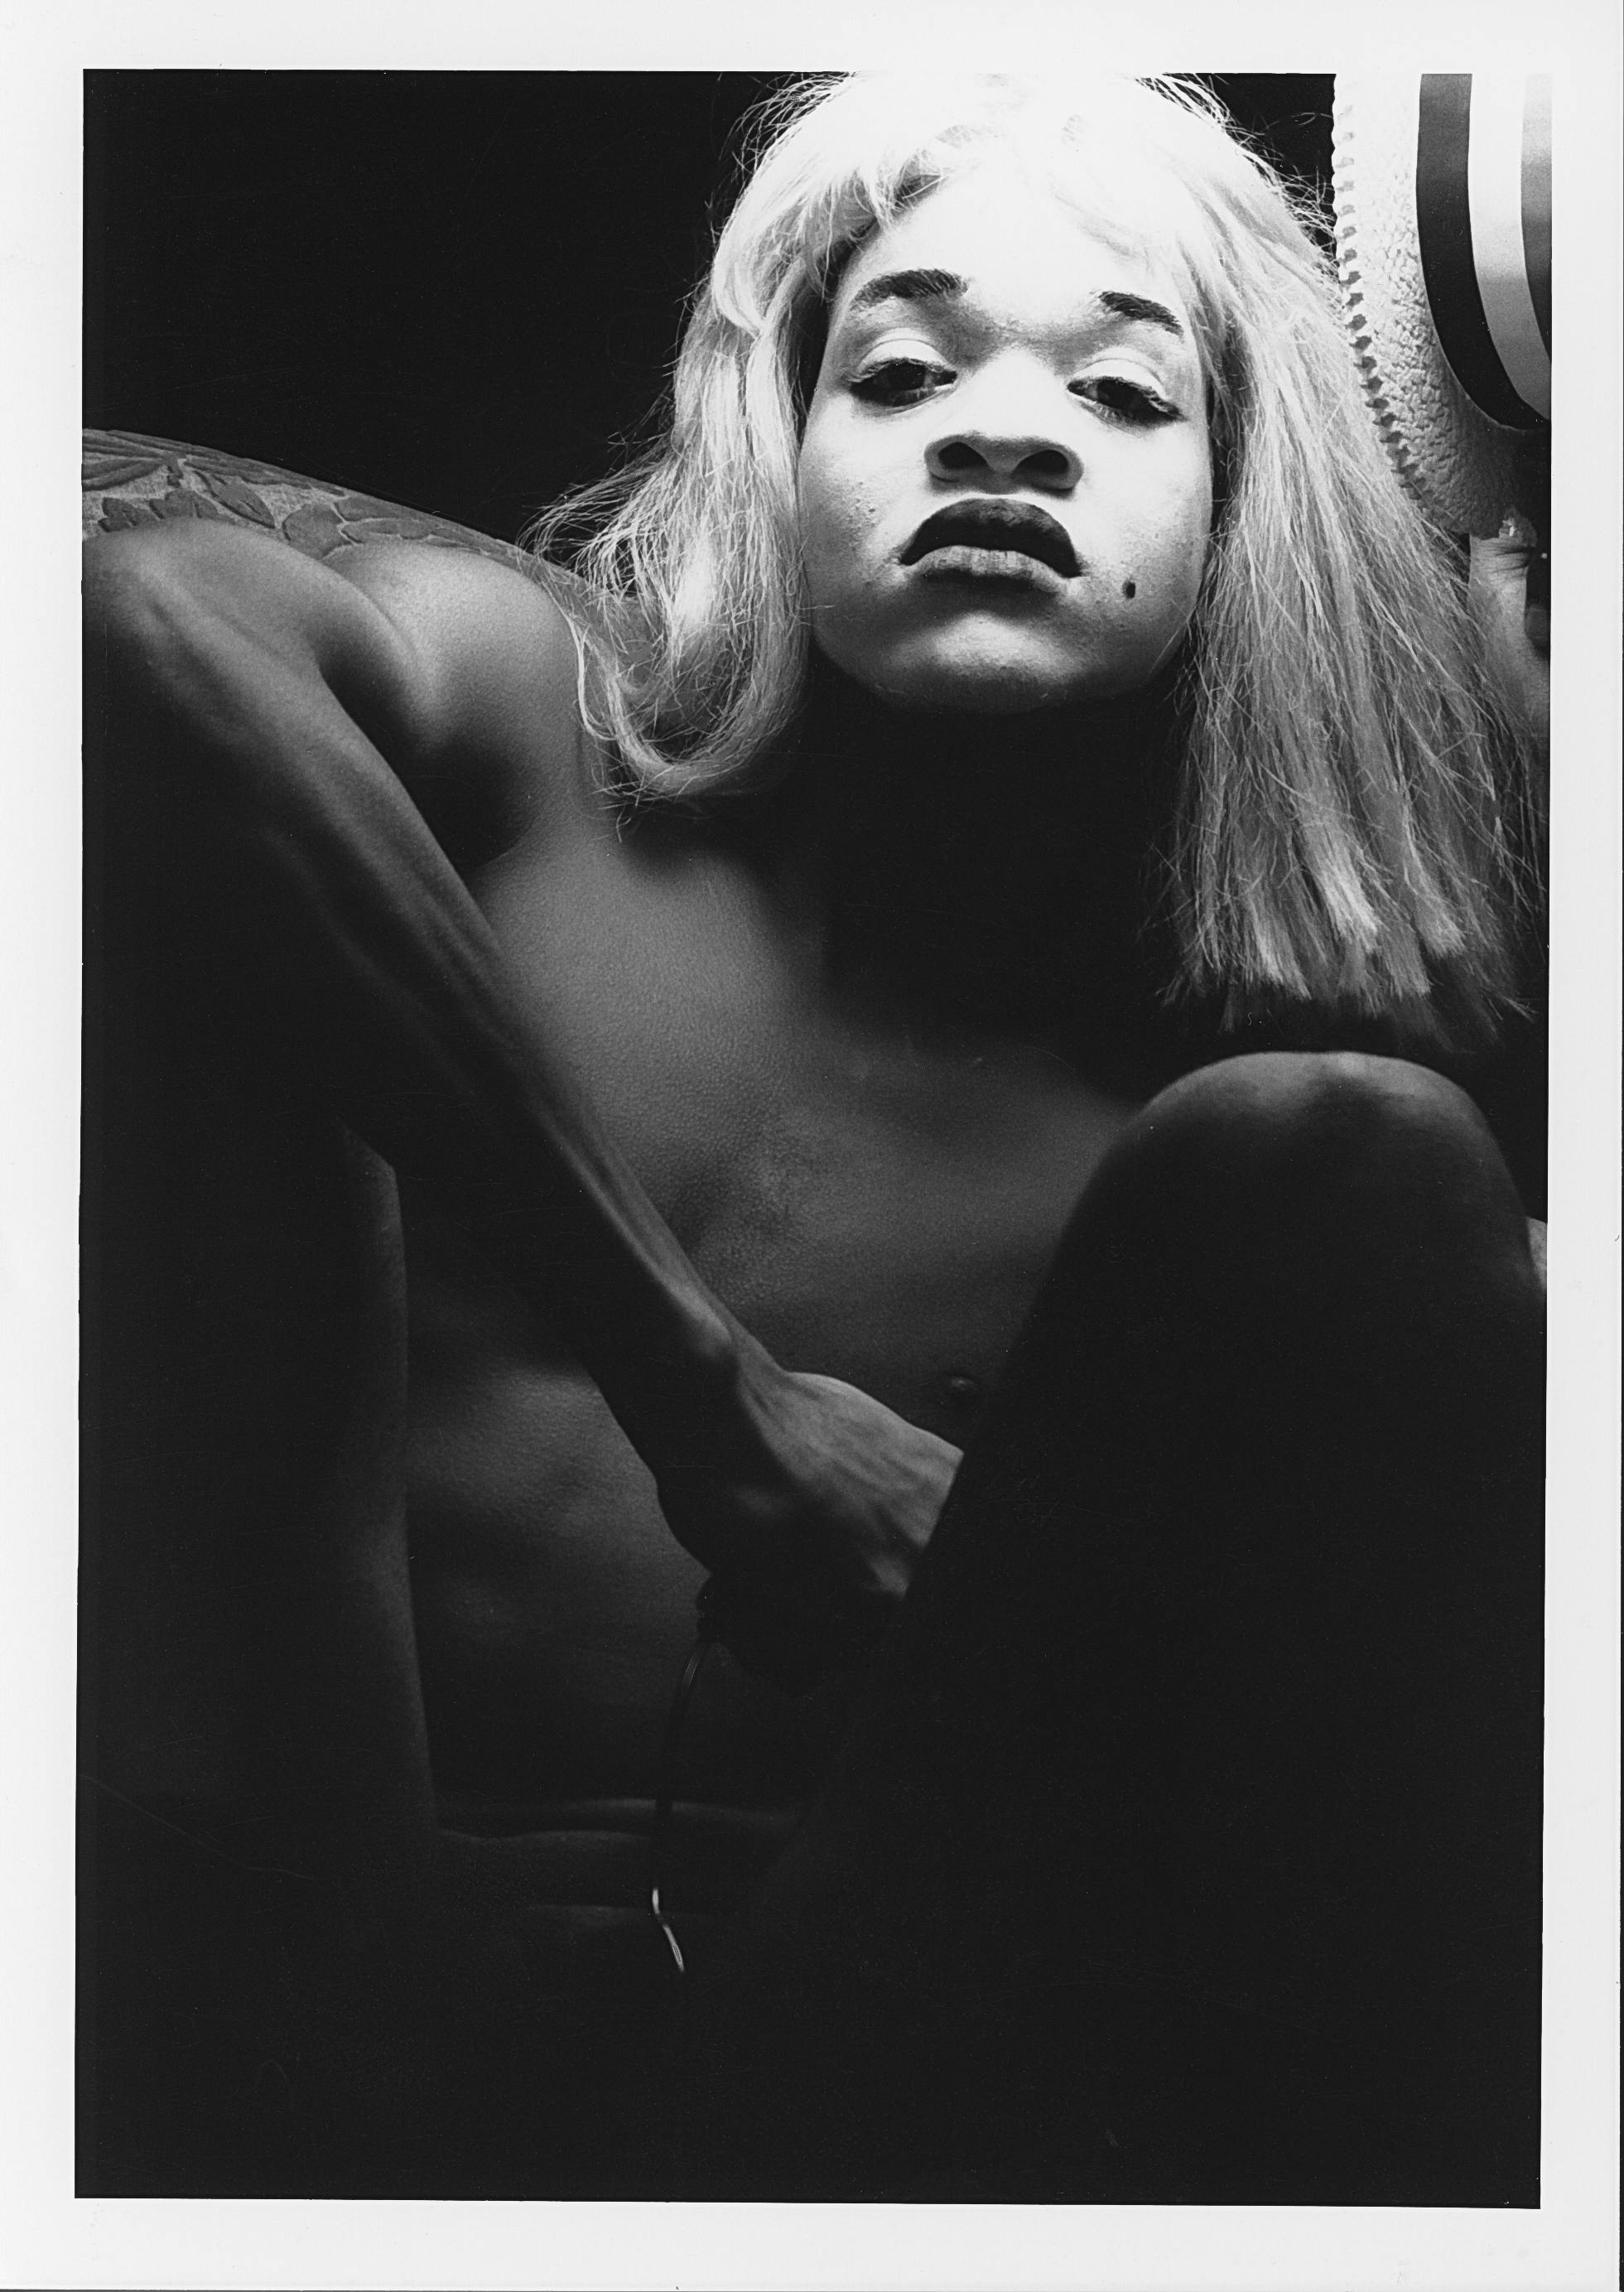 A starkly lit black and white portrait of a courching shirtless person holding a photo release trigger in their hand. They are wearing white face makeup and a wig. 